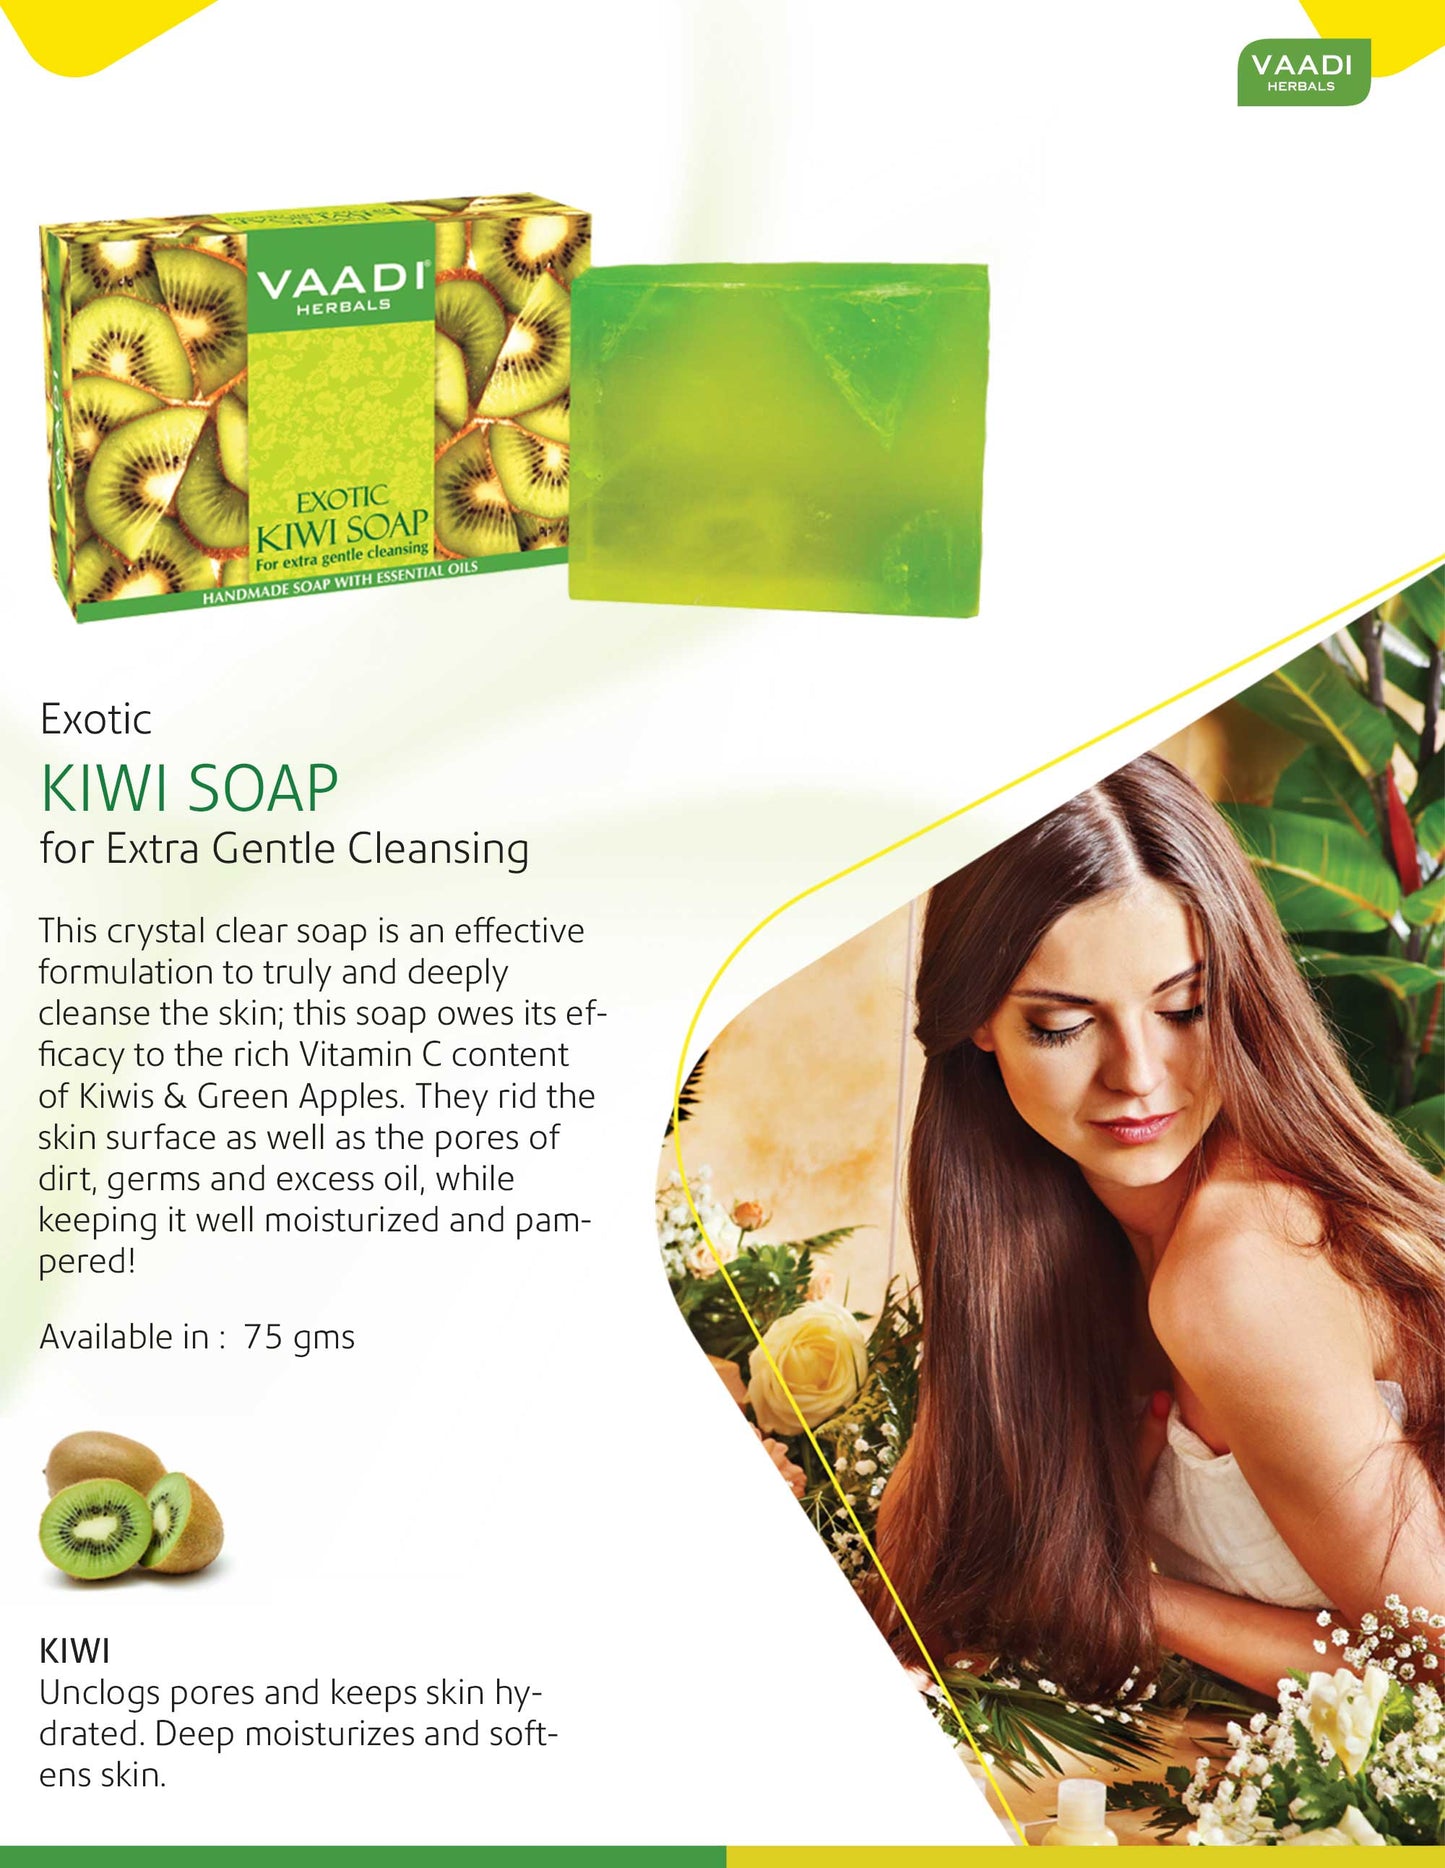 Exotic Organic Kiwi Soap with Green Apple Extract - Gently Clears Skin- Makes Skin Glowing (3 x 75 gms / 2.7 oz)